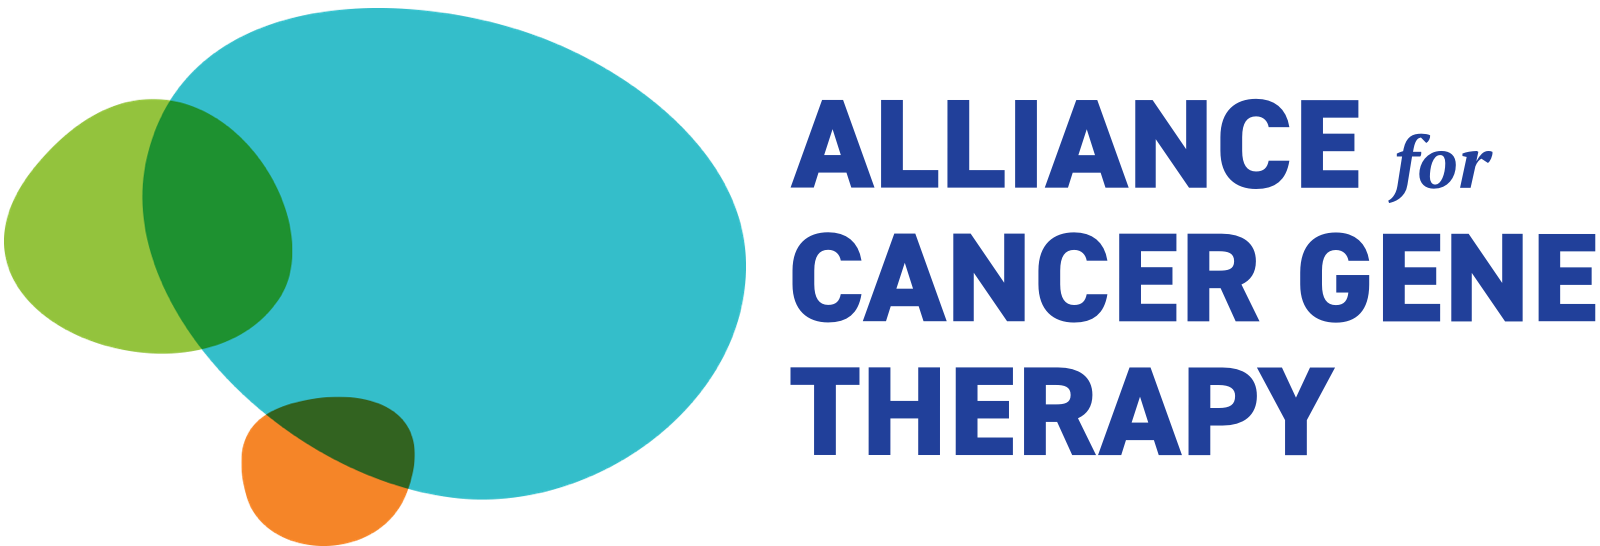 Alliance for Cancer Gene Therapy logo